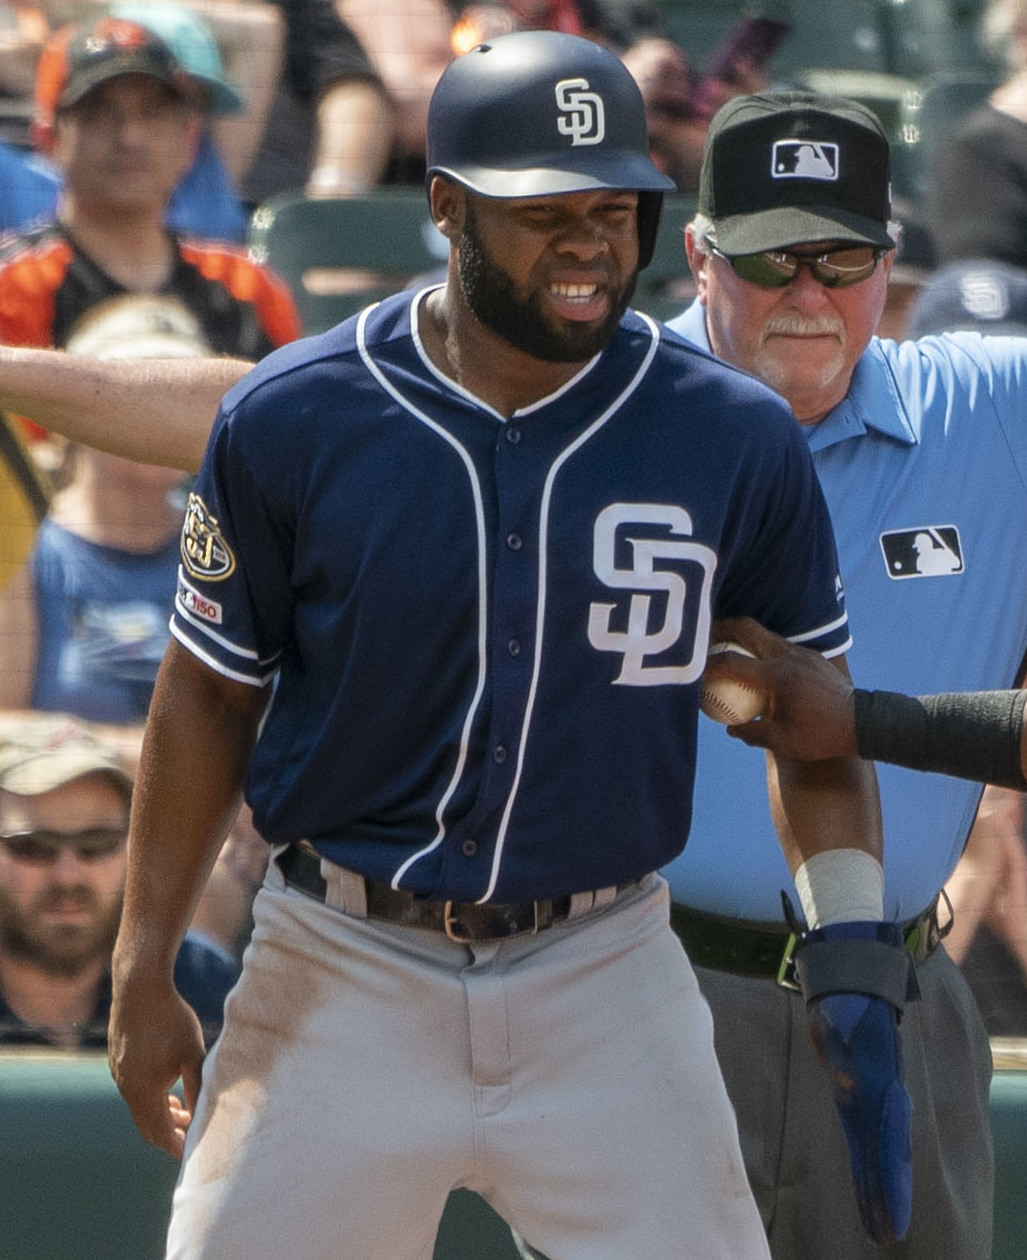 Game Used Devil Rays Jersey: Manuel Margot - May 29, 2021 v PHI